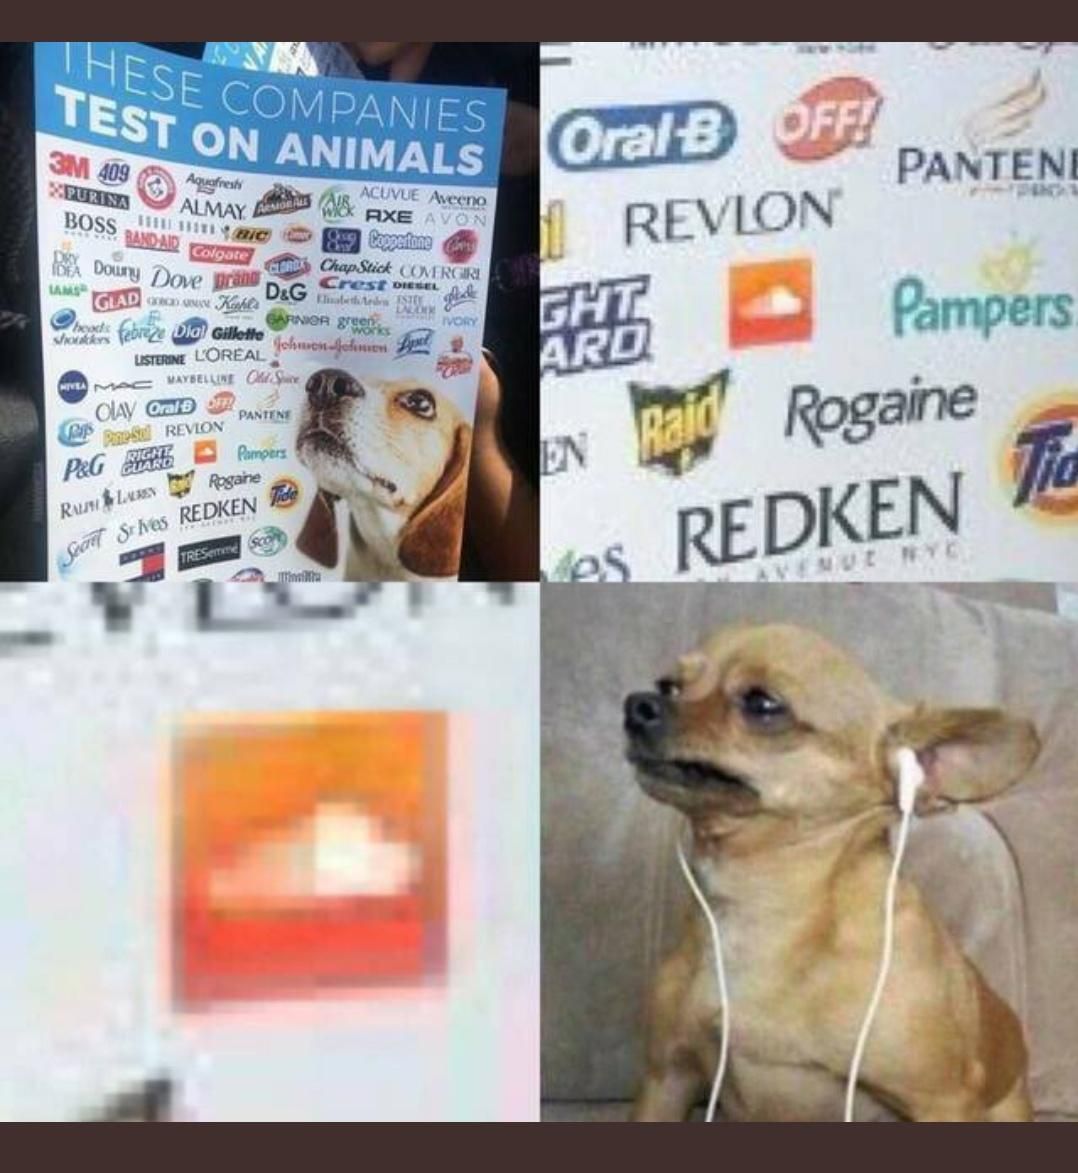 these companies test on animal's